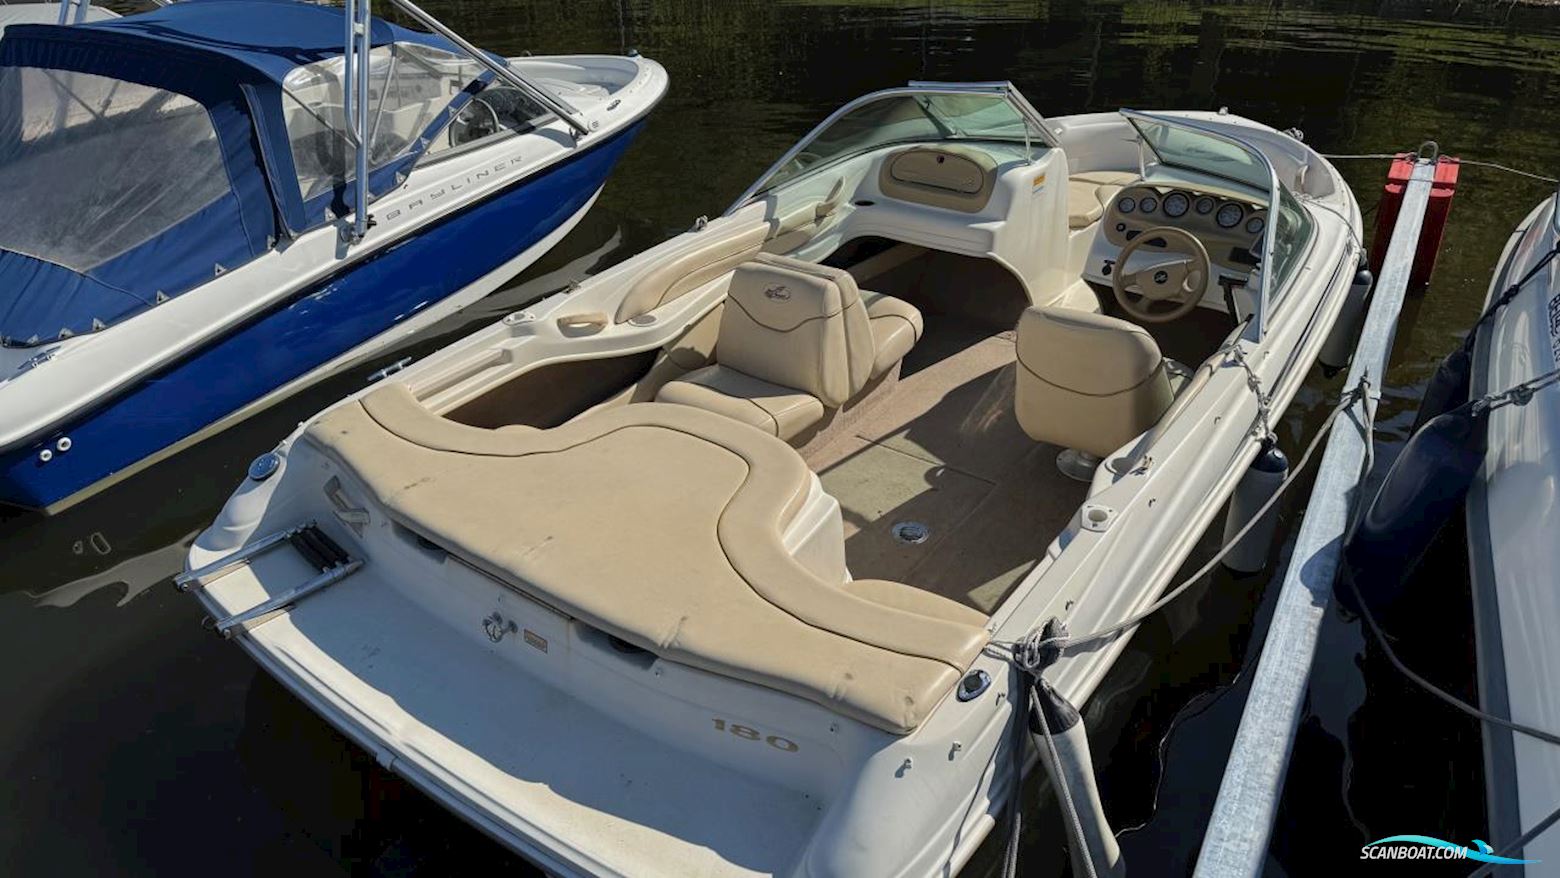 Sea Ray 180 Bowrider Motor boat 2000, with Mercruiser engine, Sweden